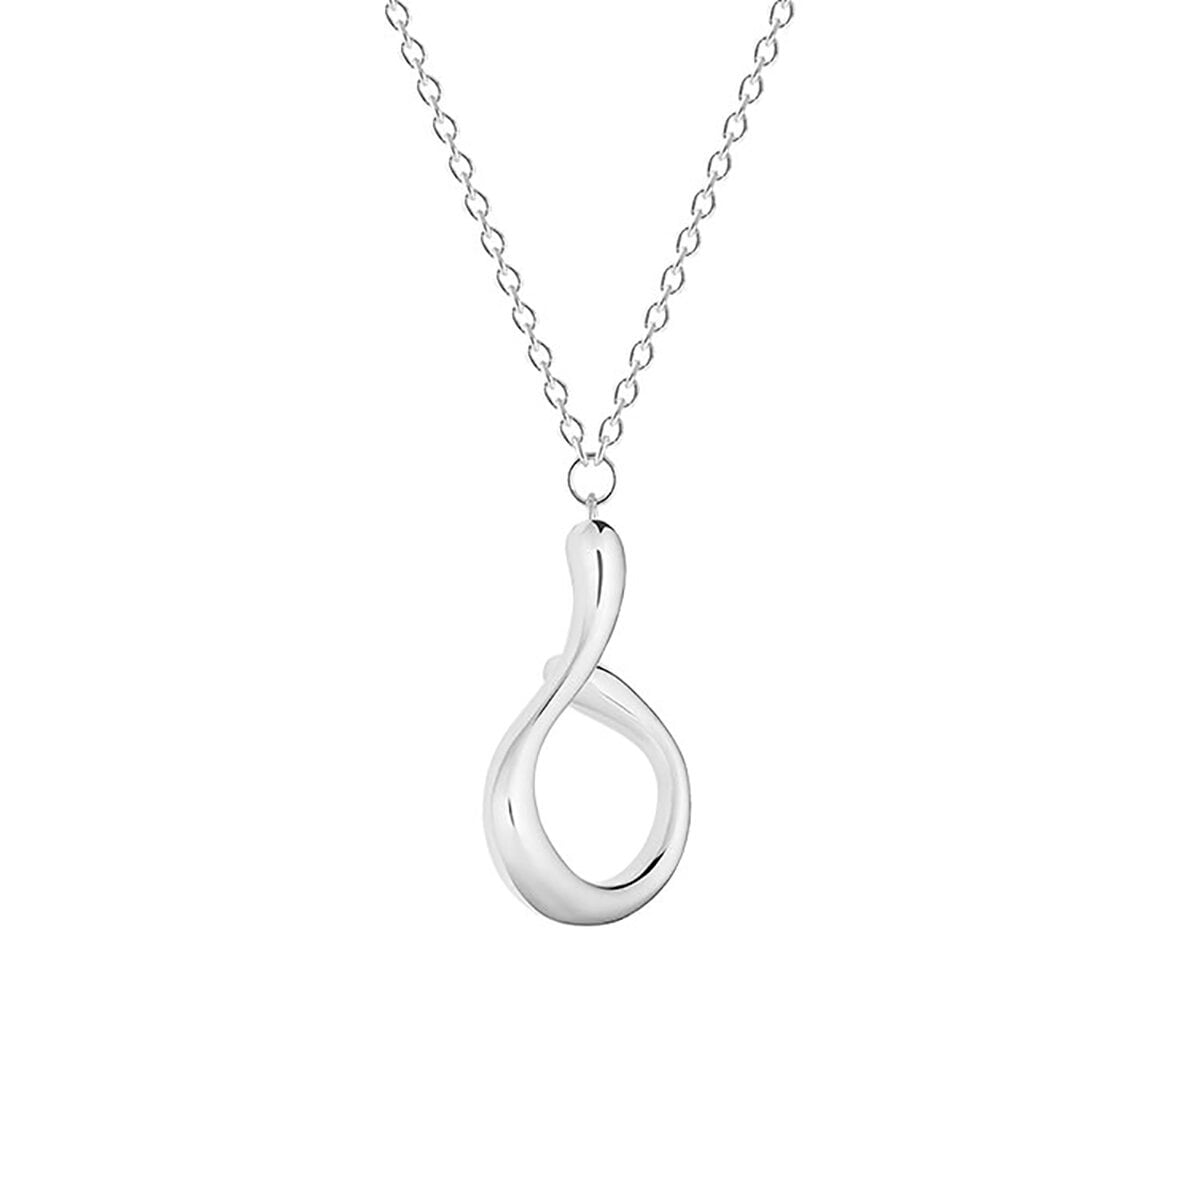 Breeze small necklace